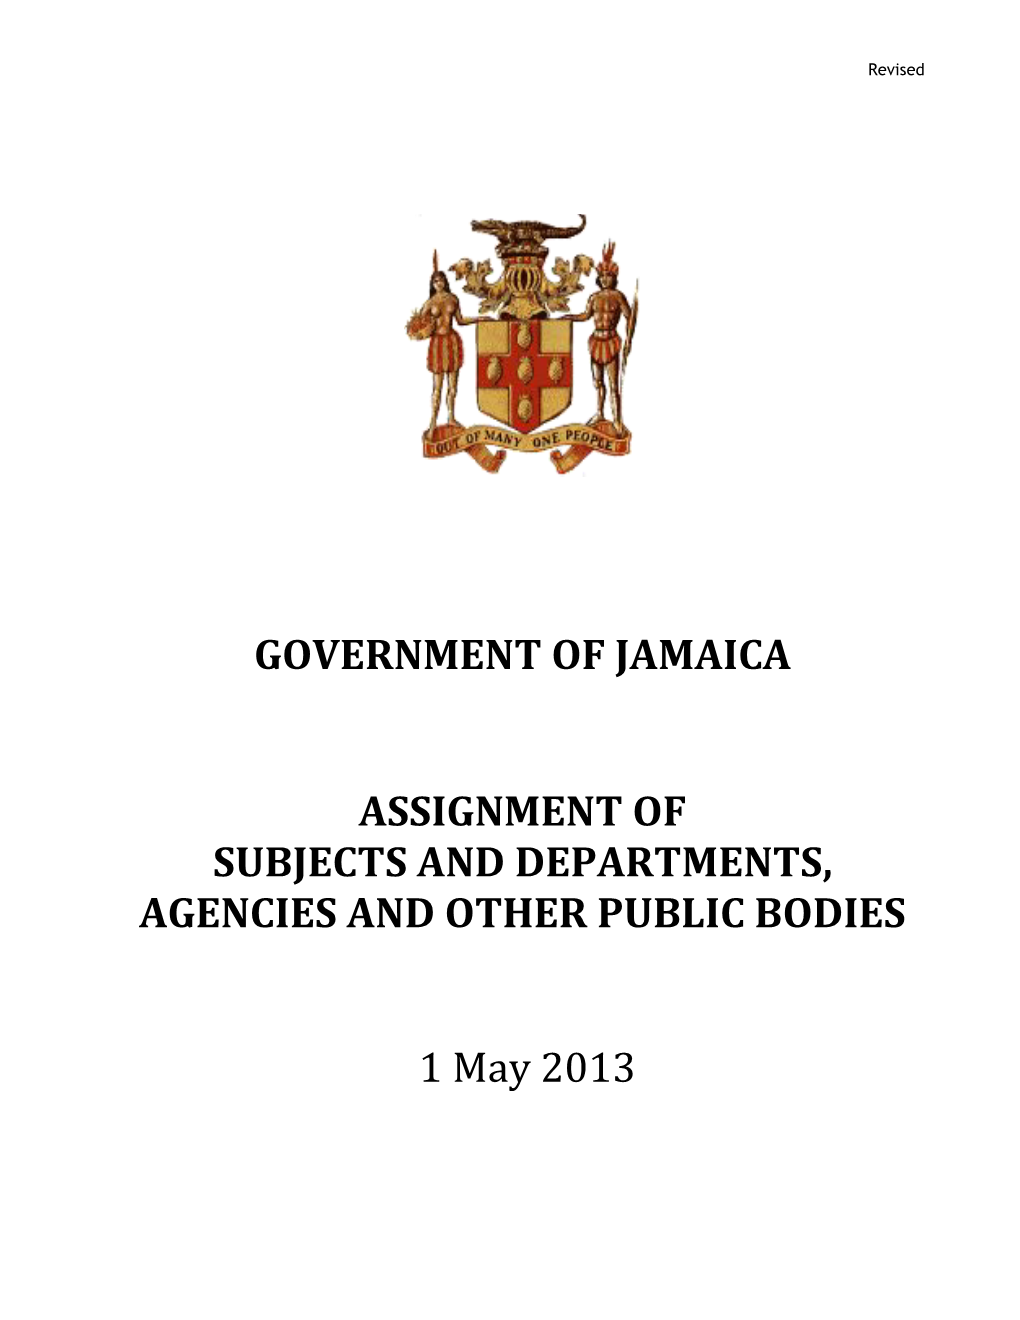 GOJ Subject Assignments – 1 May 2013